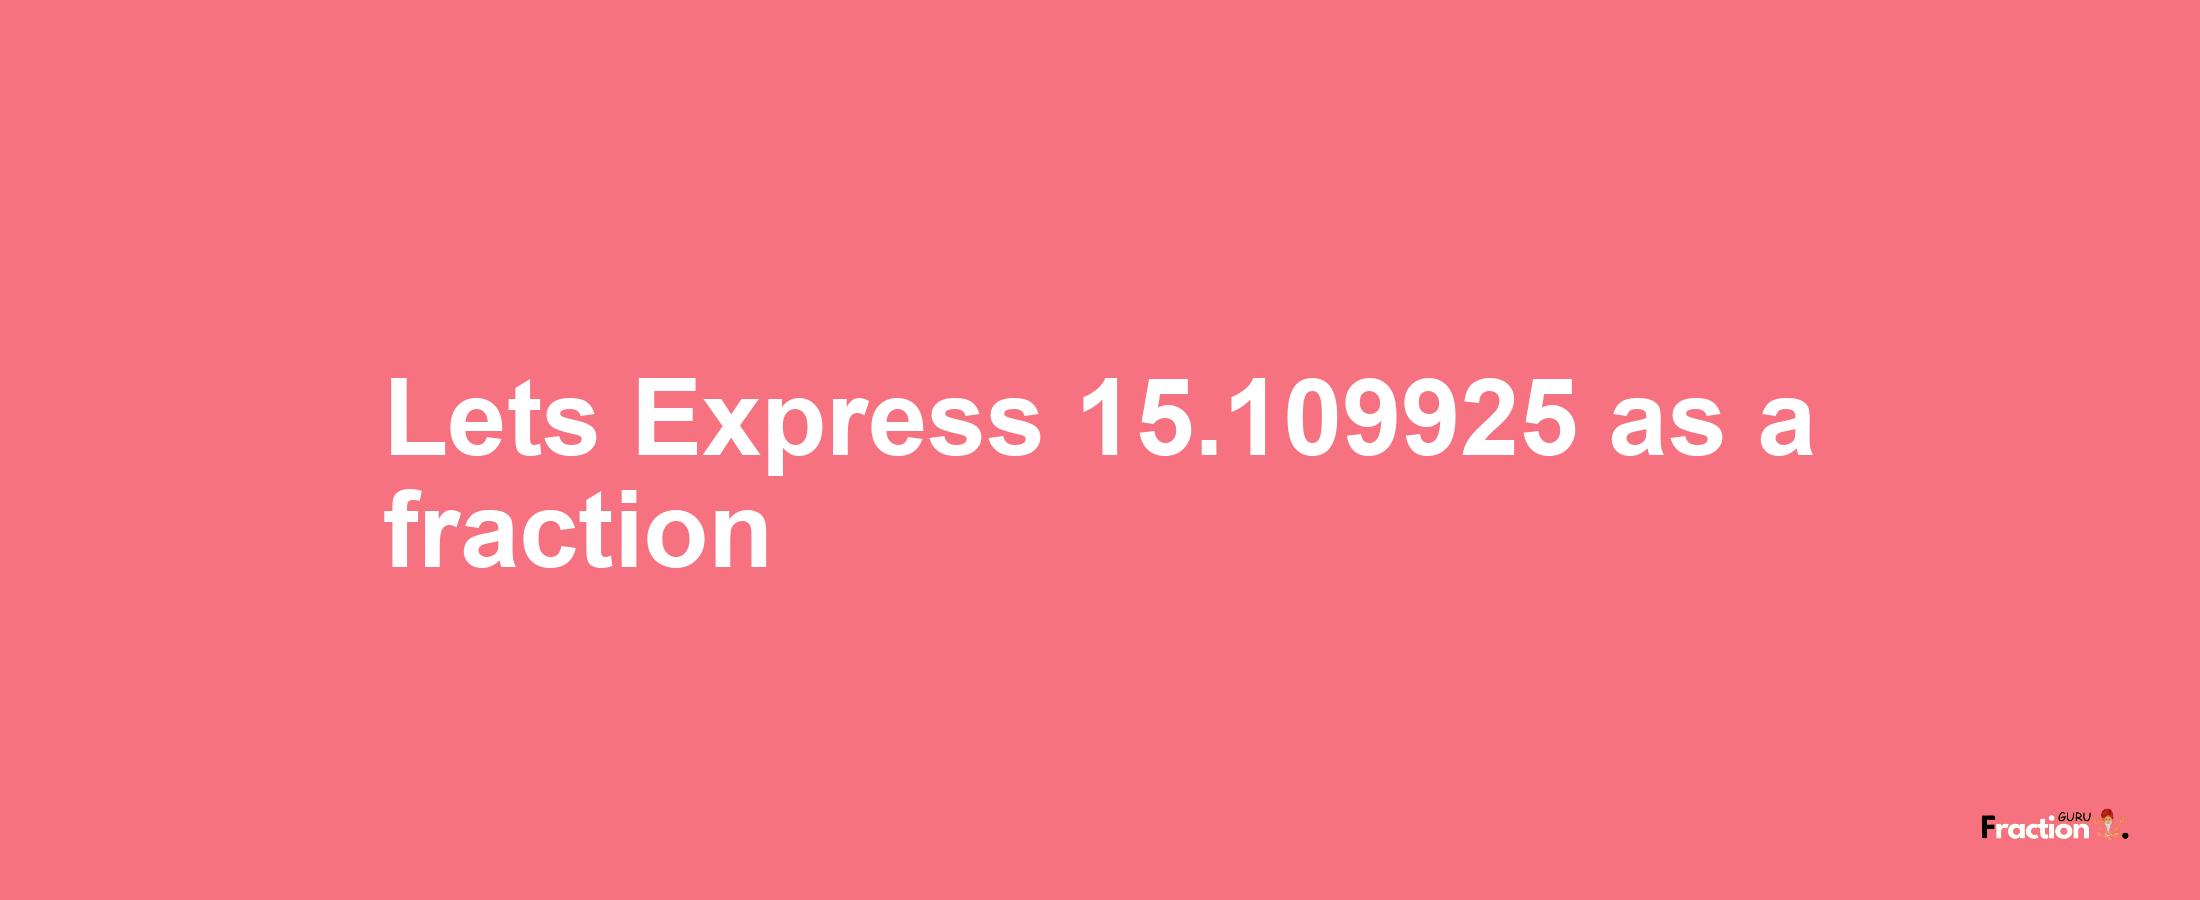 Lets Express 15.109925 as afraction